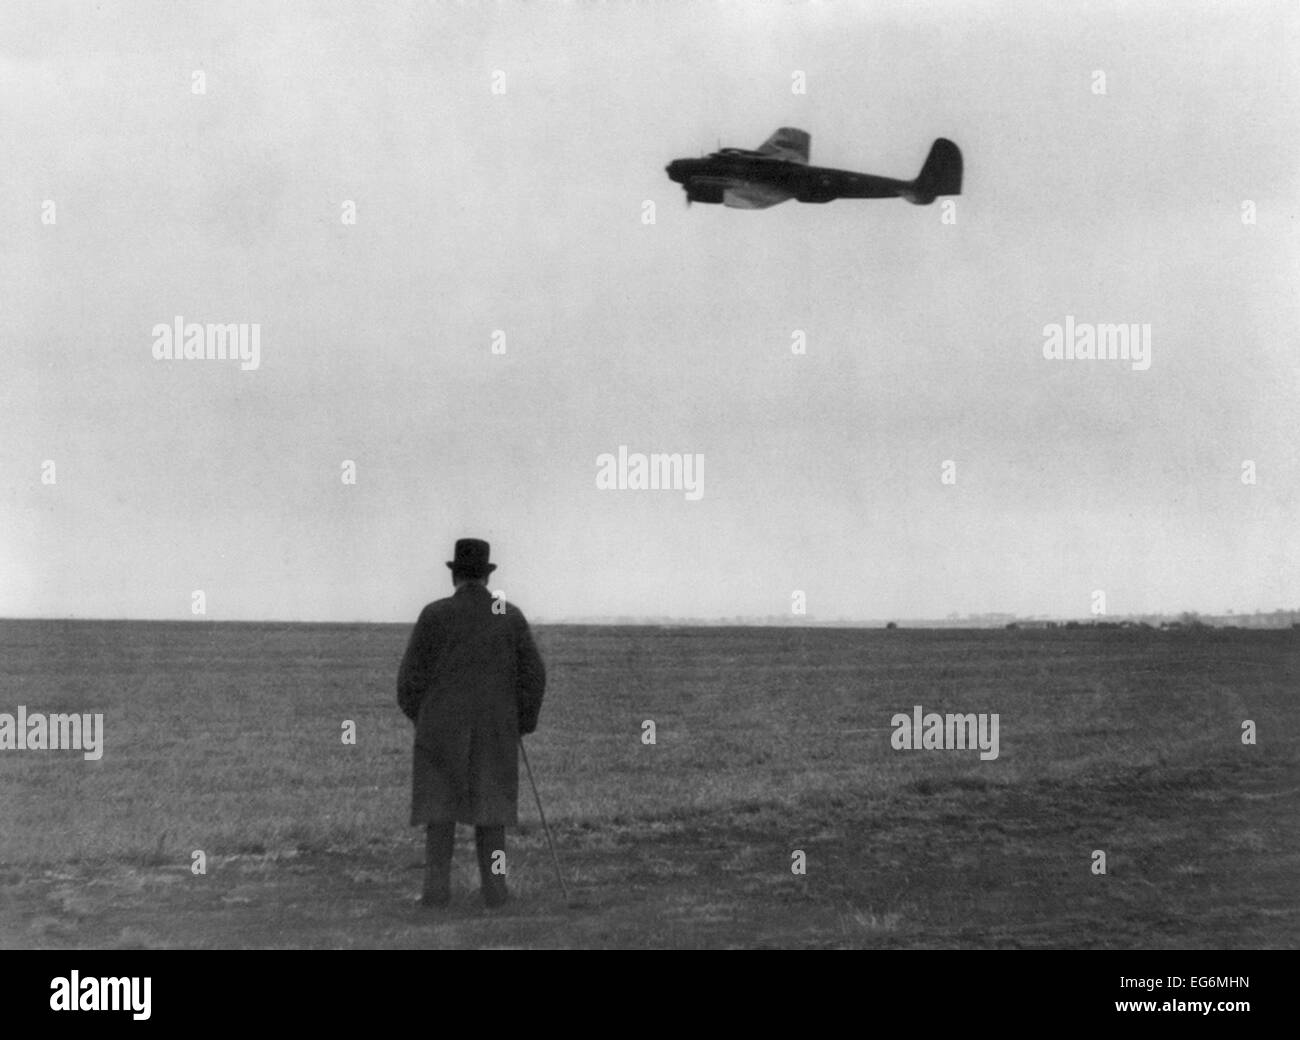 Winston Churchill, photographed from behind, watching B-17 'Flying Fortress' in flight. July 1940. World War 2. Stock Photo